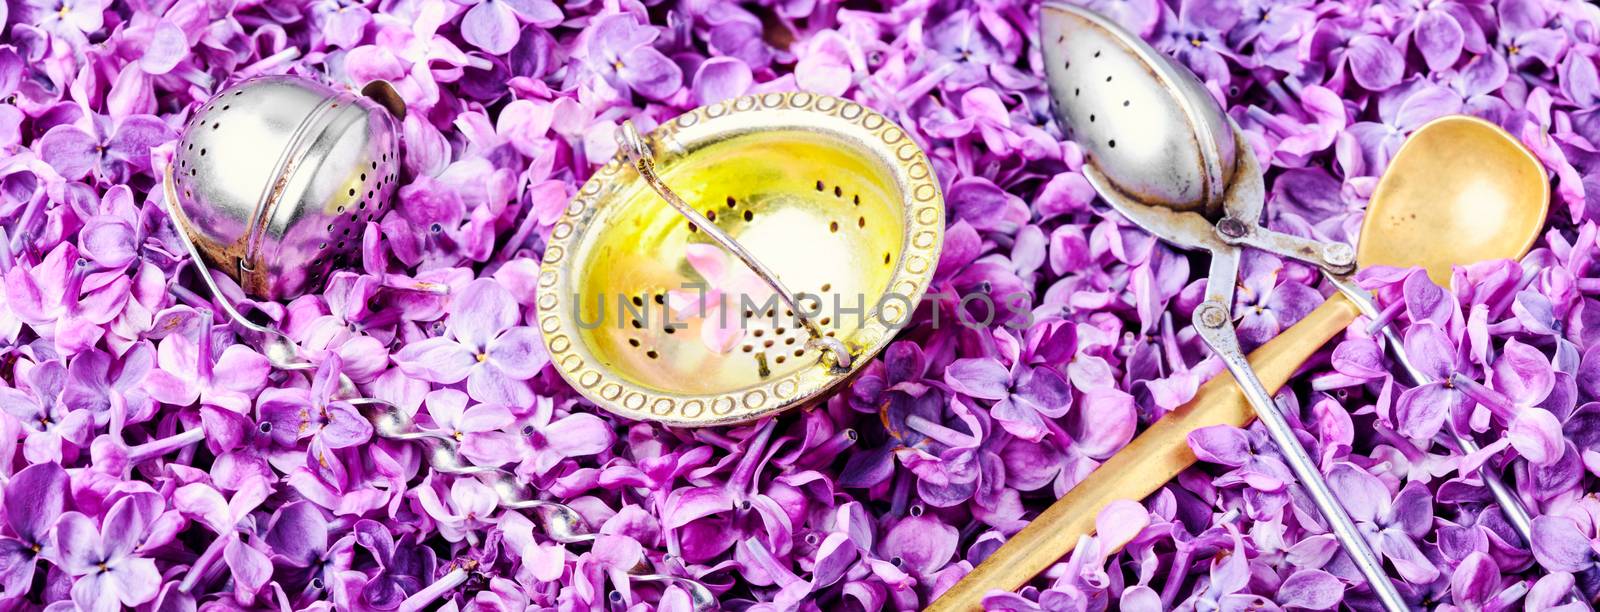 Tea background with lilac flowers and tea attributes. Herbal tea.